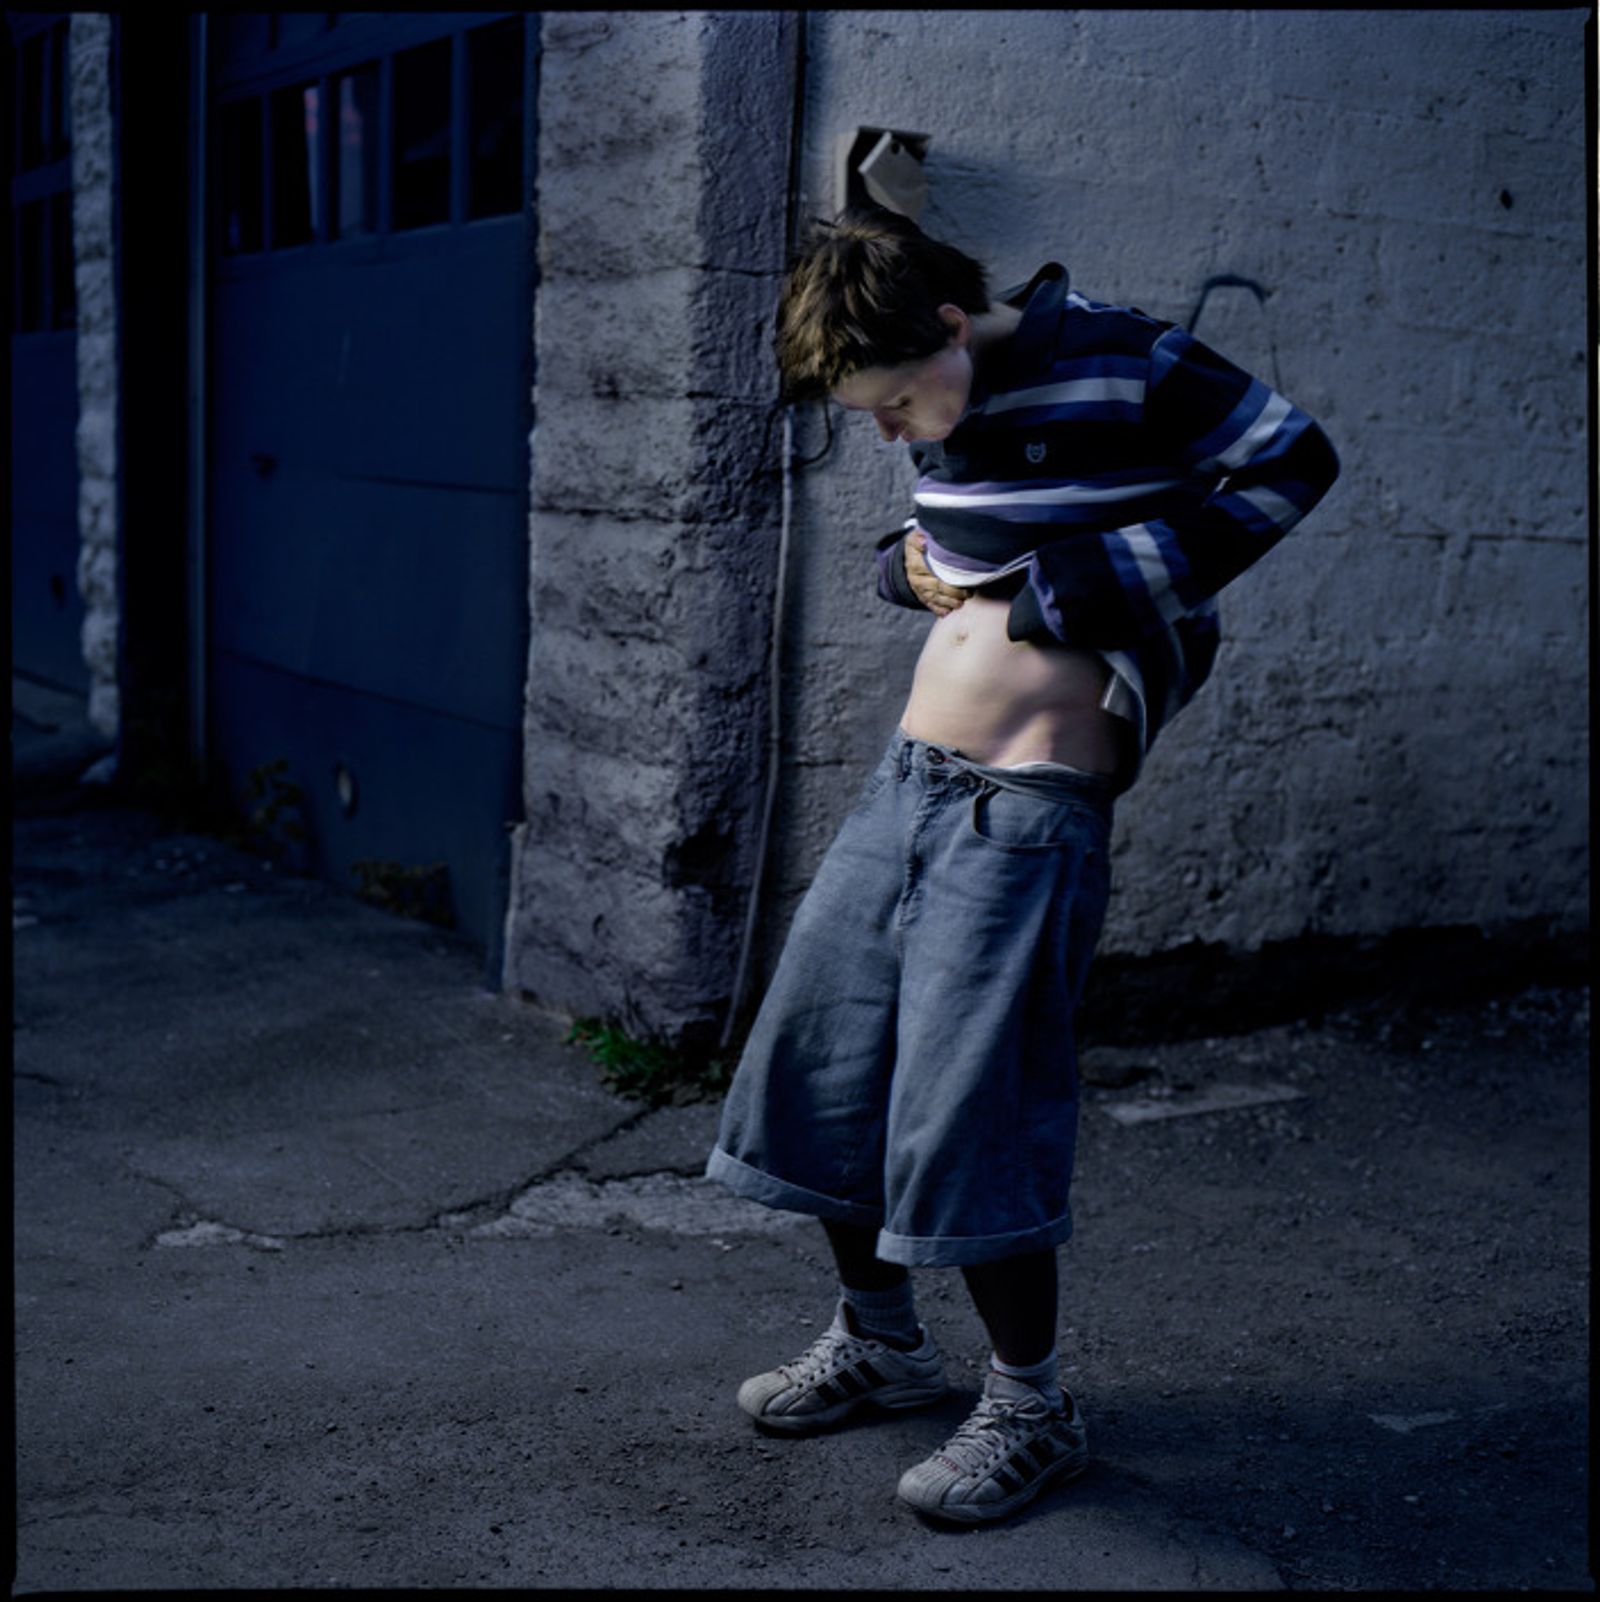 © Tony Fouhse - From the series: USER, Portraits of Crack Addicts.